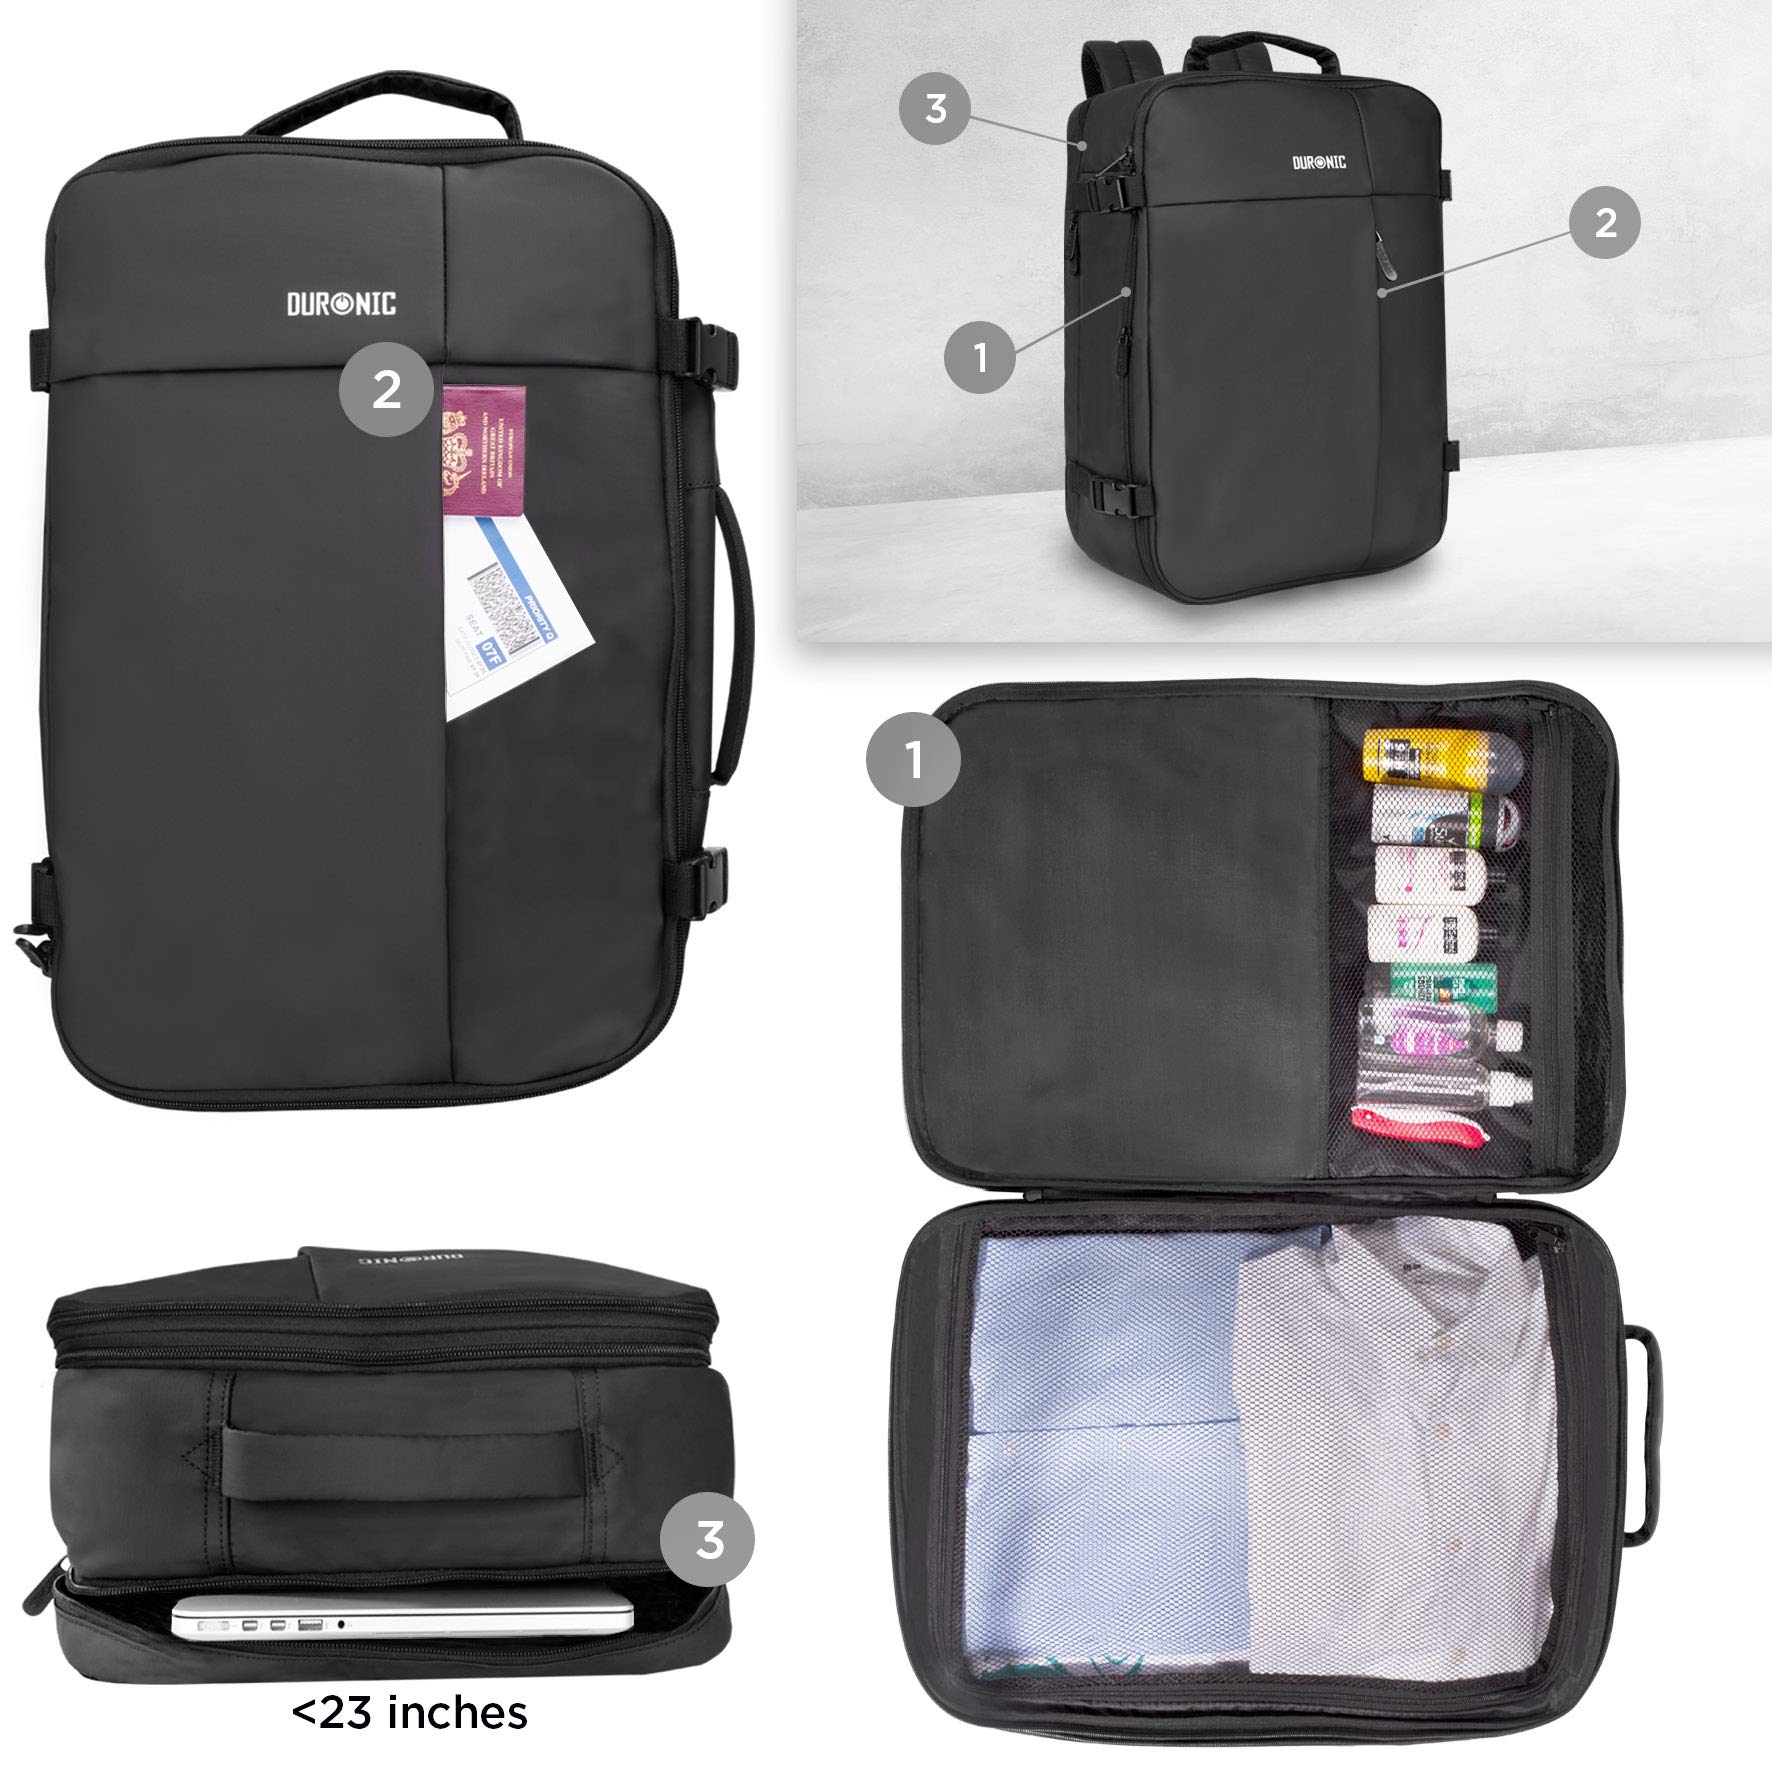 Duronic Cabin Bag LB326 | Max Cabin Size Case | Large Flight Approved Carry On | 14 15 17 Inch Laptop MacBook Sleeve | Multiple Compartments | Luggage Strap for Travel | Water-Resistant Backpack